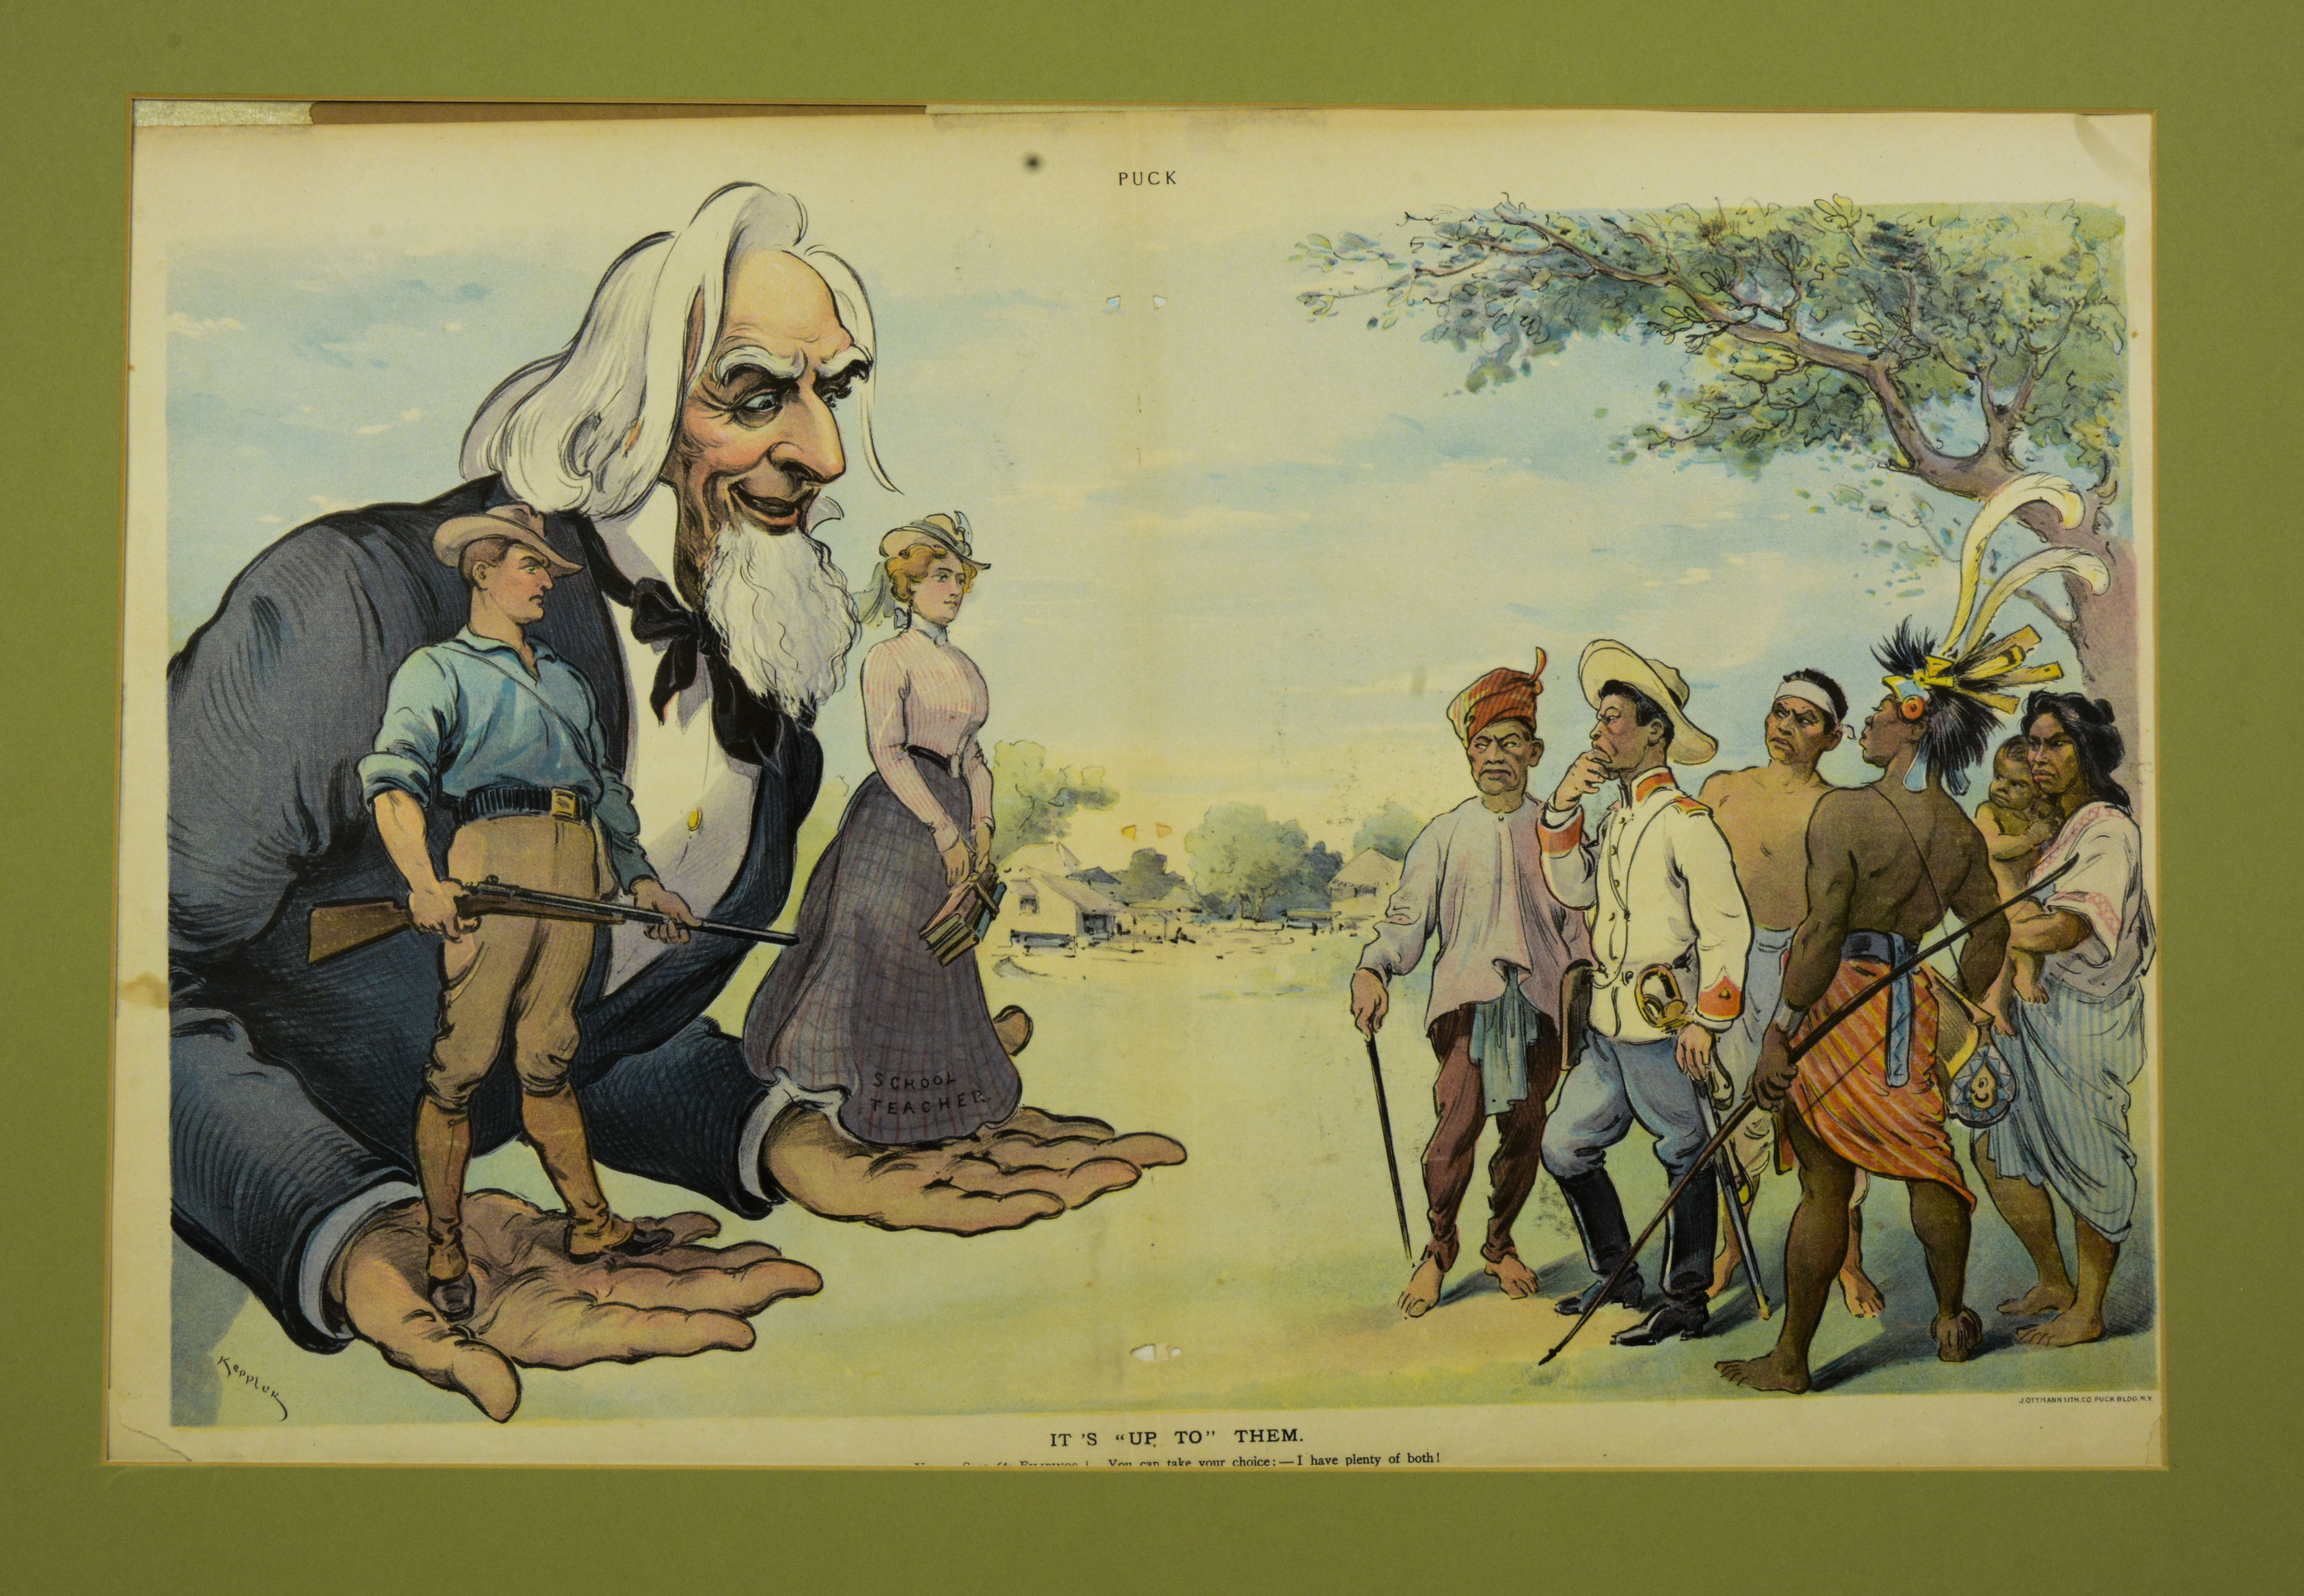 Illustration owned by Paulla Santos.Acquired in June 2017 from Odana Antiques and Fine Arts, Madison, WIBought while antiquing.Illustration of Uncle Sam, white female teacher, white male soldier, Filipinos.Language in EnglishNotes from Sarah Carlson, in discussion with Santos: Found in same antique store [as previous], different seller. Pulls Keppler print from New York, around 1898. Uncle Sam holding 2 options, offering teaches (civilizing, learning westerners) or man with a gun. Filipinos onother with reacting, representing different regions: Mindanao, Manila/Tagalog, lowlands, Cordilleras, Northerners. Walking through friend saw it, pointed it out, got excited, drew me. I study US/Philippine relations. Thought it was too expensive, negotiated through text topurchase for $150. Connections at UW-Madison helped make that connection. Kept wrapped in a closet away from my cat-hoping to frame it. Hung in apartment away from light. Studying transnational marriage between Philippines and US. Parents had a transnational arrangedmarriage by maternal group. Grandmother (Ran away at 16 to get married against parents wishes. Never legally married but had 8 children. Eventually grandmother left went to Singapore, worked in hotel, met new husband.) had 4 sons, 4 daughters, 2 daughters married US men, 3rddaughter married an American too but wasn’t arranged. Only learned parents marriage was arranged until recently. Wanted to know more about imperialism, US/Philippines relationship, penpals/”mail order”, US servicemen/entertainment workers, bride schools. How the USsponsored bride schools in the USA haven’t found much written about it. Learning Tagalog - mom’s first language. Last name is Santos, but pronounced English Way, dad is American. Grandfather’s(adoptive parents are Filipino, 1930’s huge anti-Filipino sentiment, howdid they adopt a white boy? Family lore of kidnapping. Any views, findings, conclusions, or recommendations expressed in this story do not necessarily represent those of the National Endowment for the Humanities. (c) Field Museum of Natural History - CC BY-NC 4.0